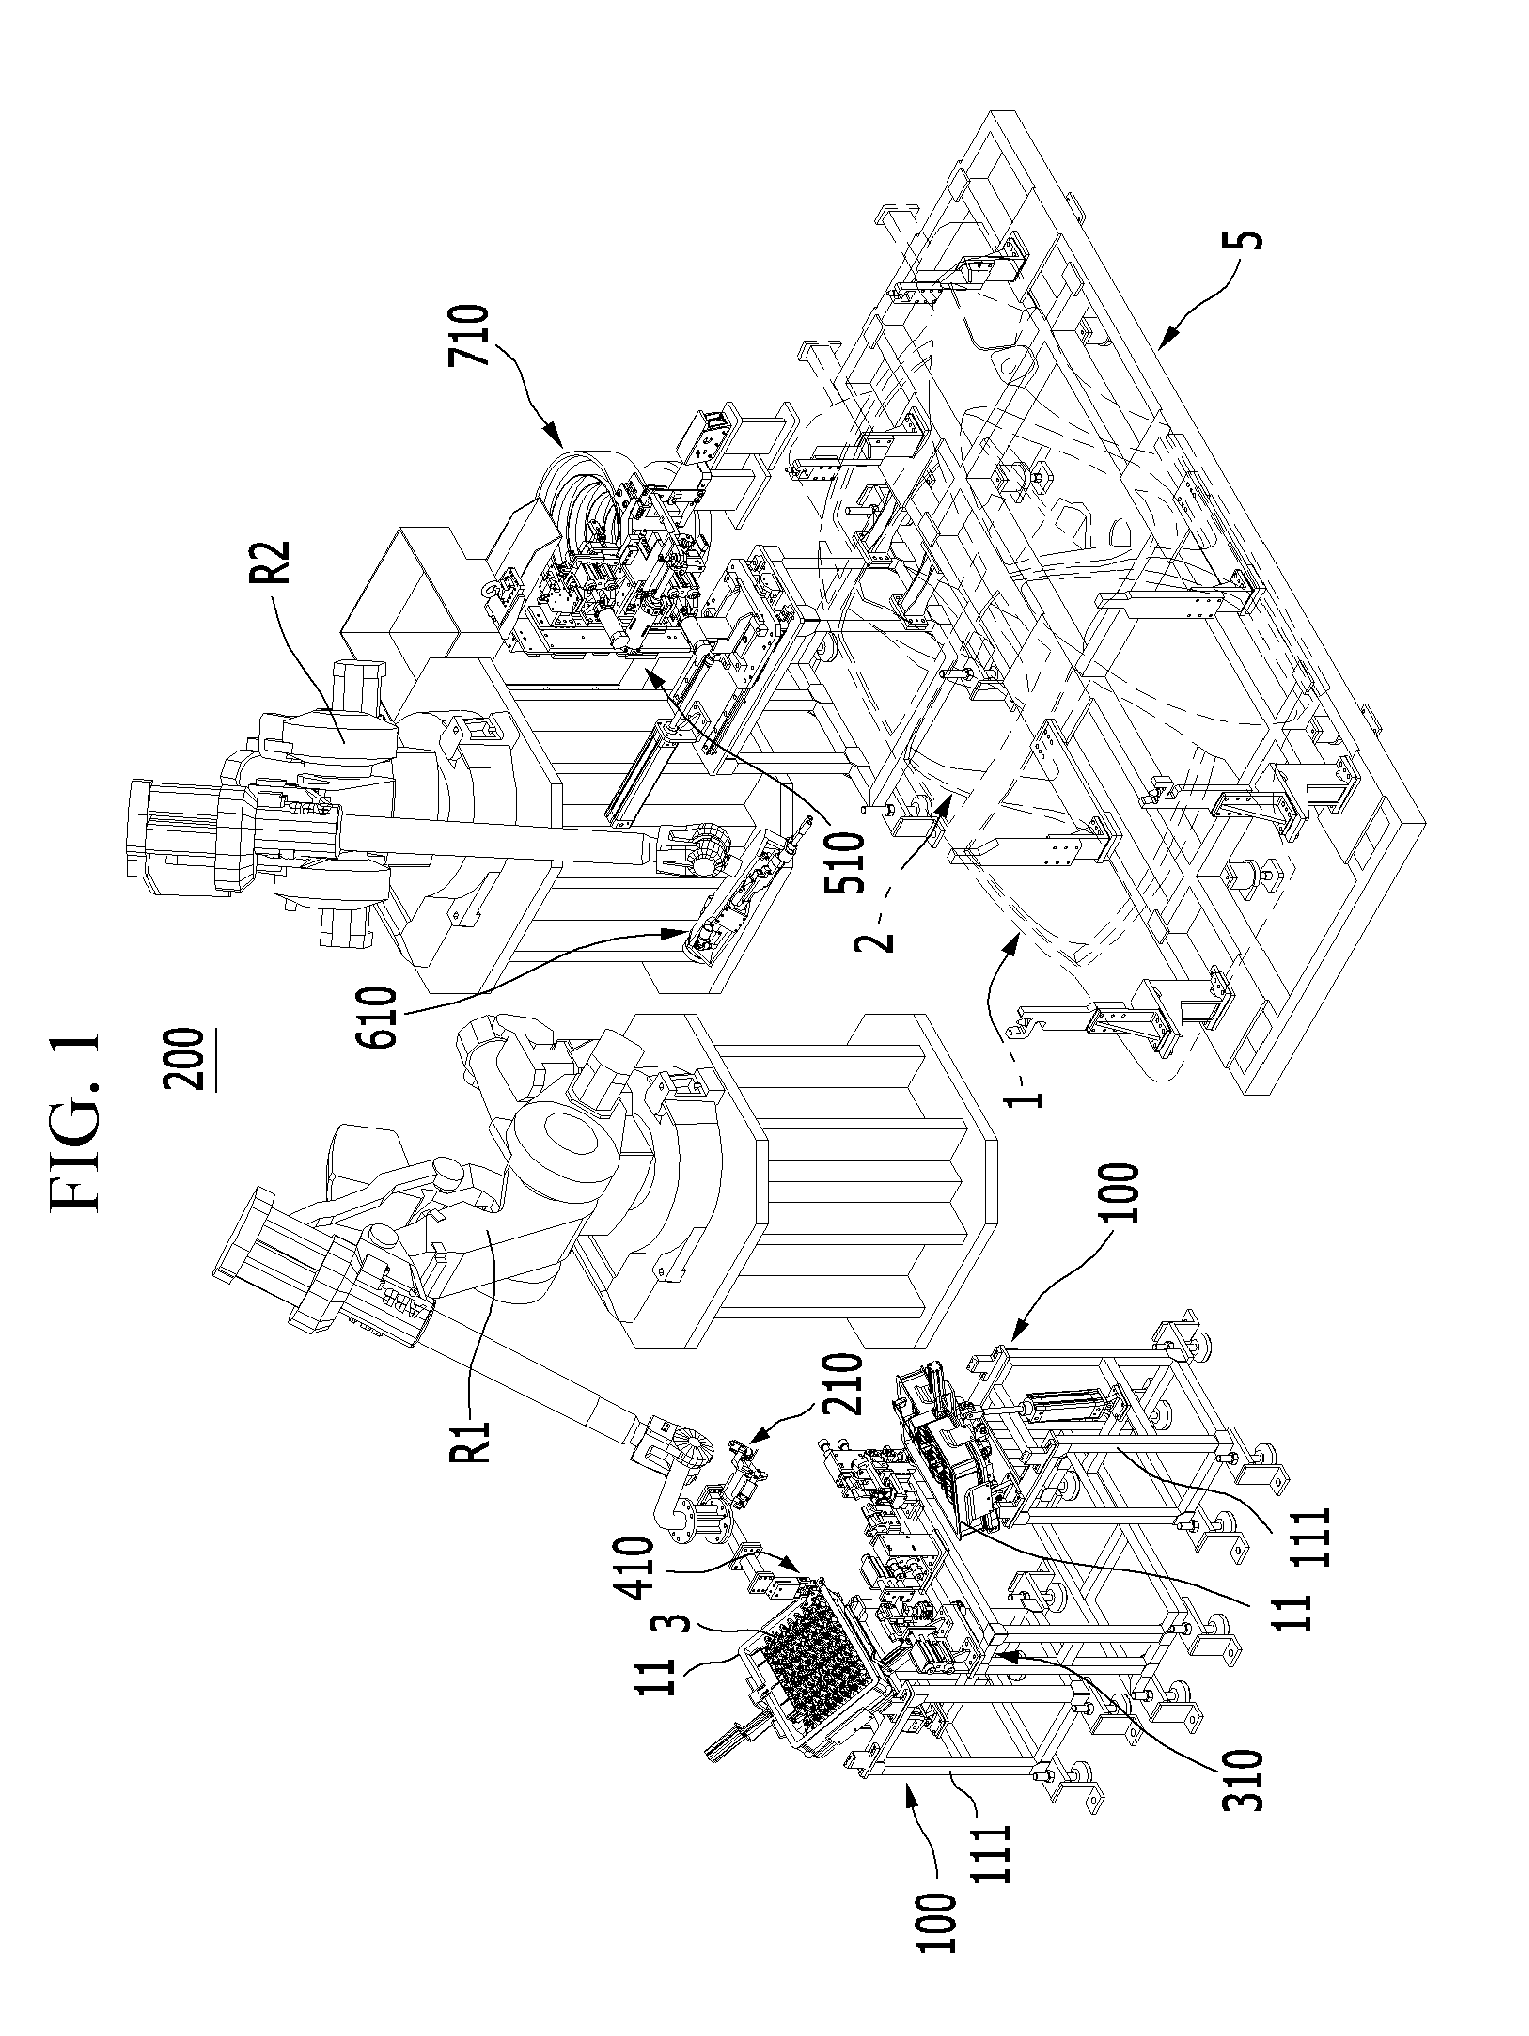 Device for aligning door hinge of automatic system for mounting door hinge to vehicle